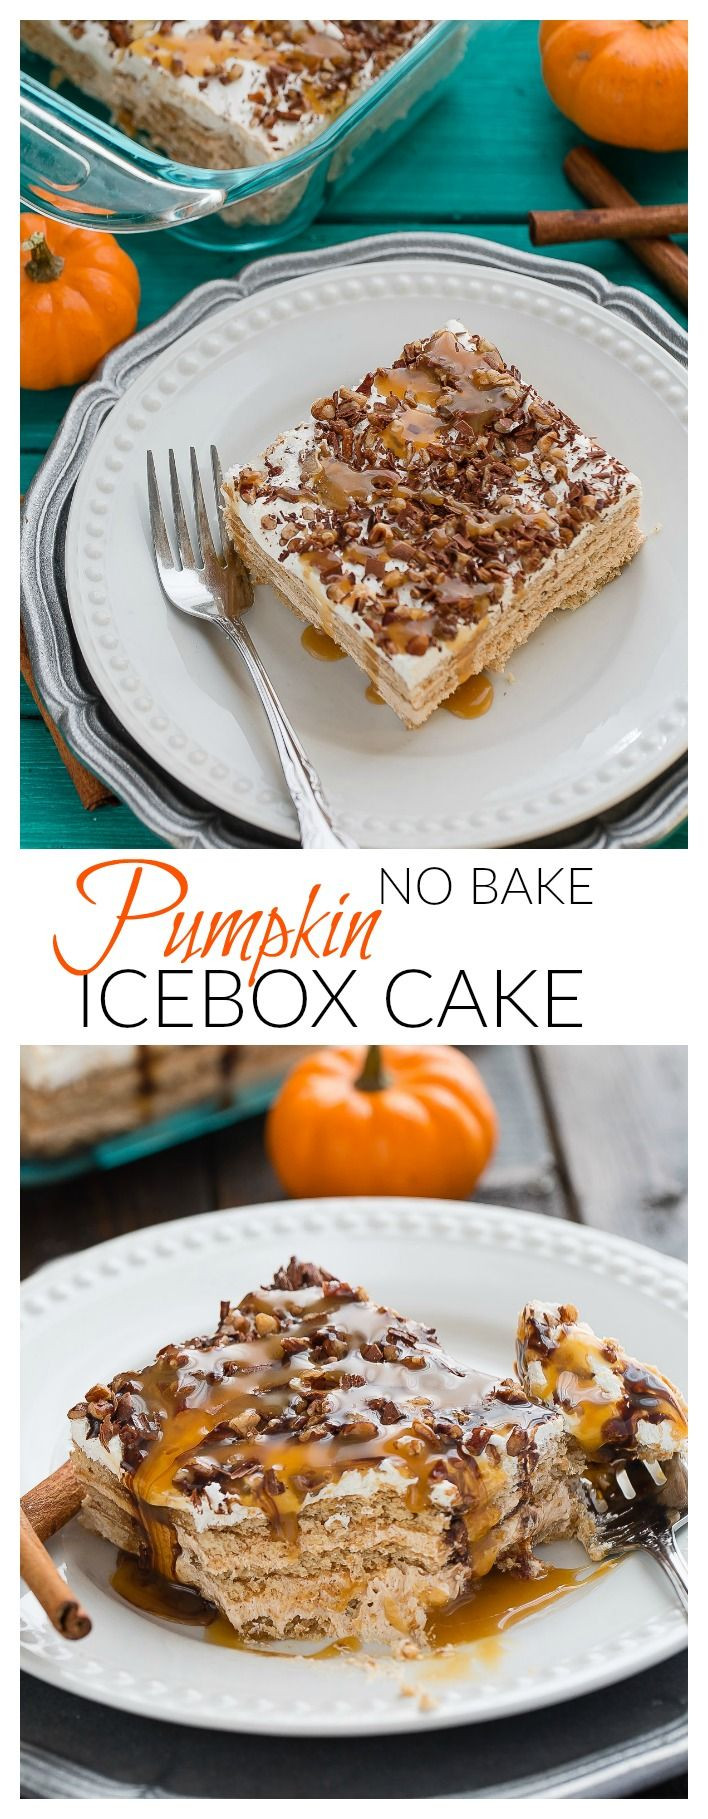 Fall Flavors For Desserts
 Pumpkin Ice Box Cake is the perfect easy no bake fall